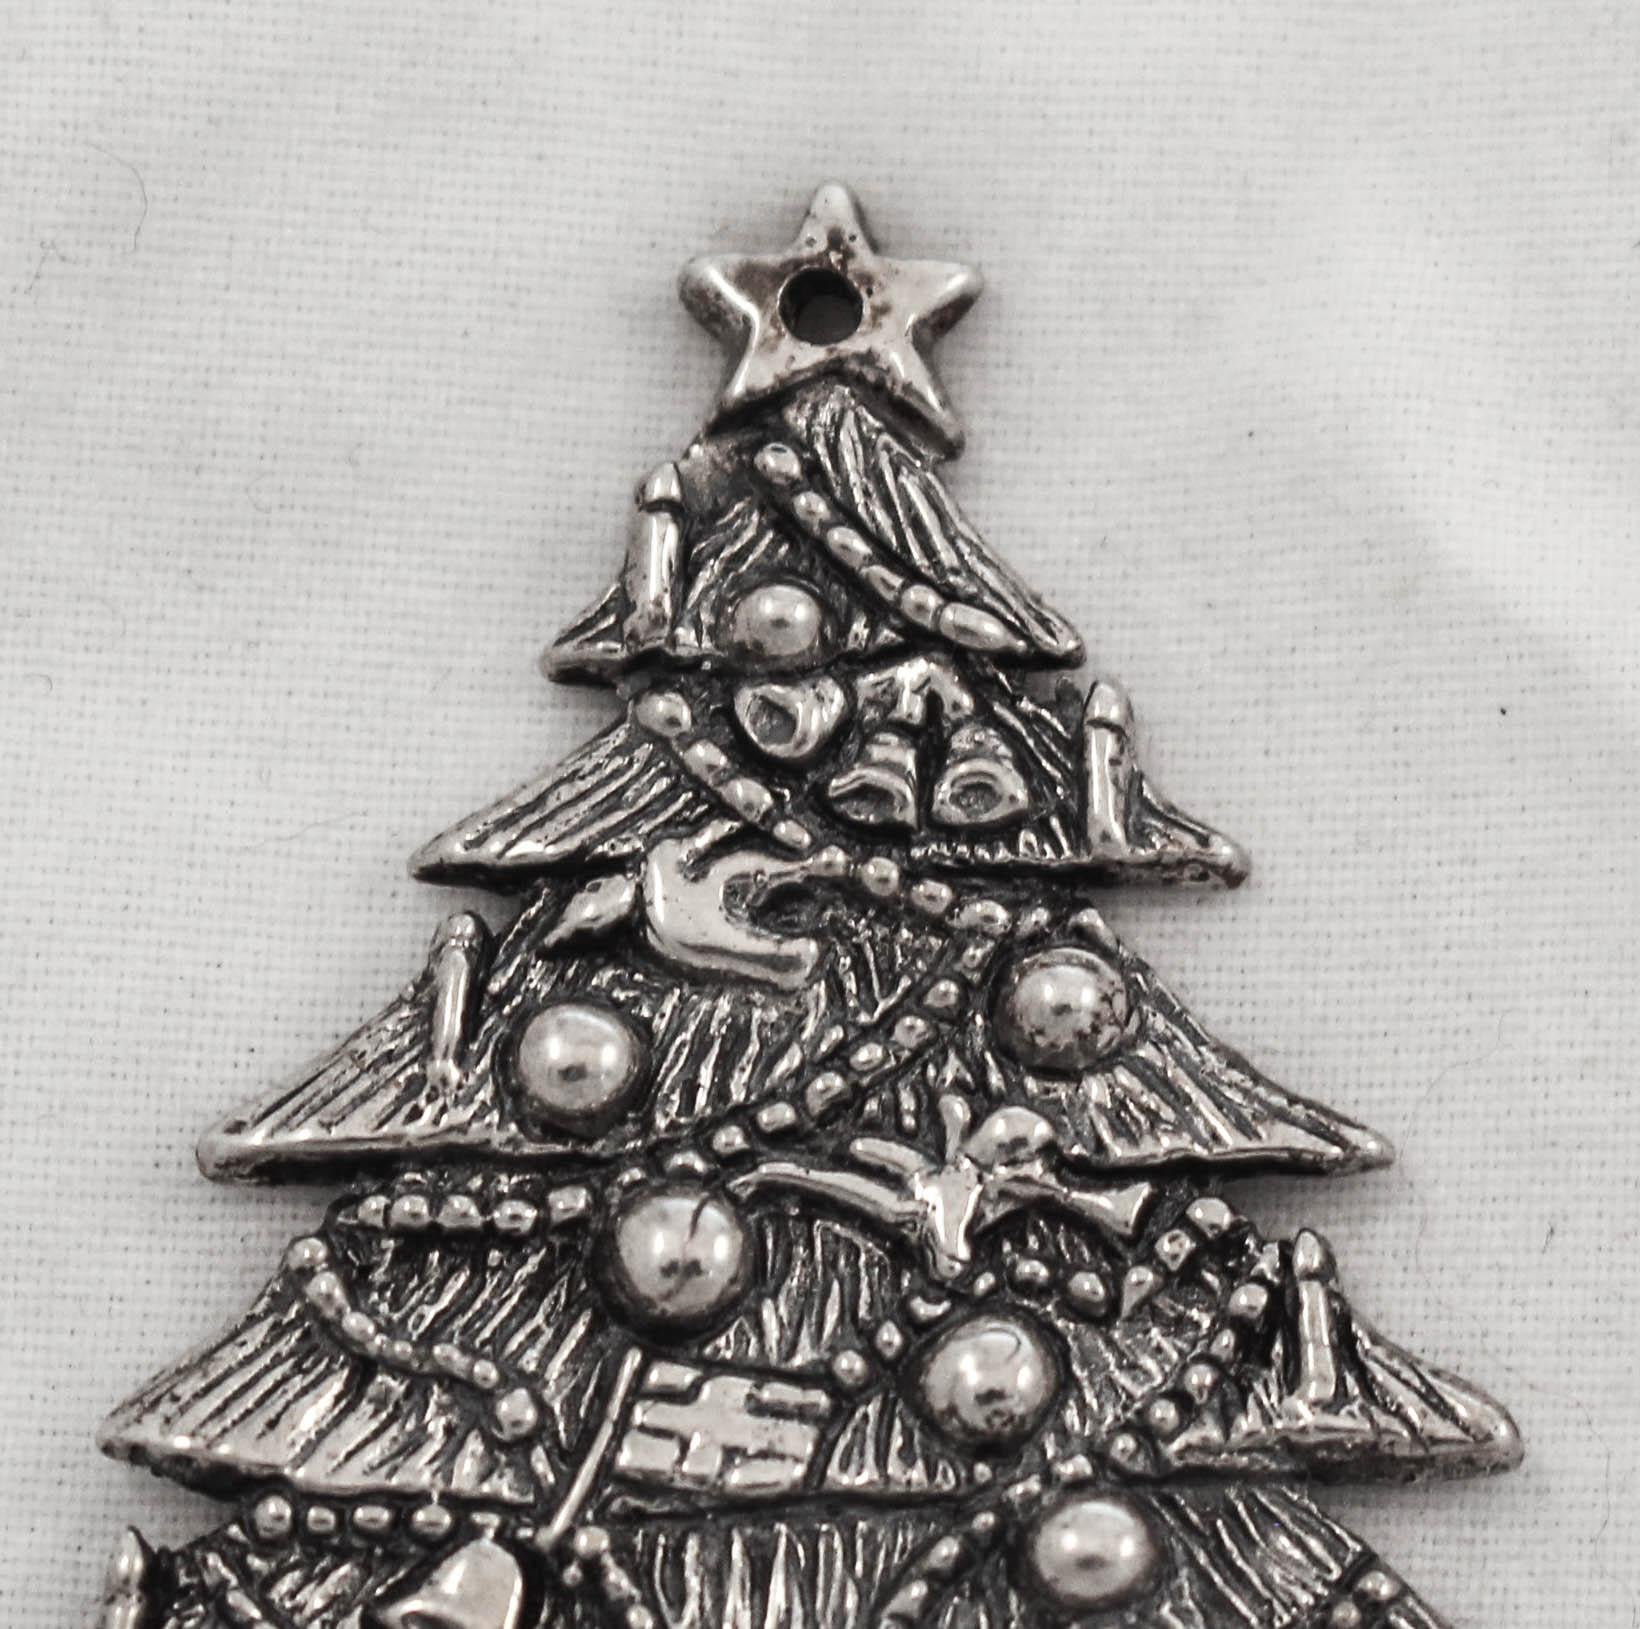 We are thrilled to offer this sterling silver Christmas ornament of a decorated Christmas tree. Bells, baubles, angels with horns, candies and a star give this tree that decorated holiday look. An old and rare sterling Christmas ornament to add to